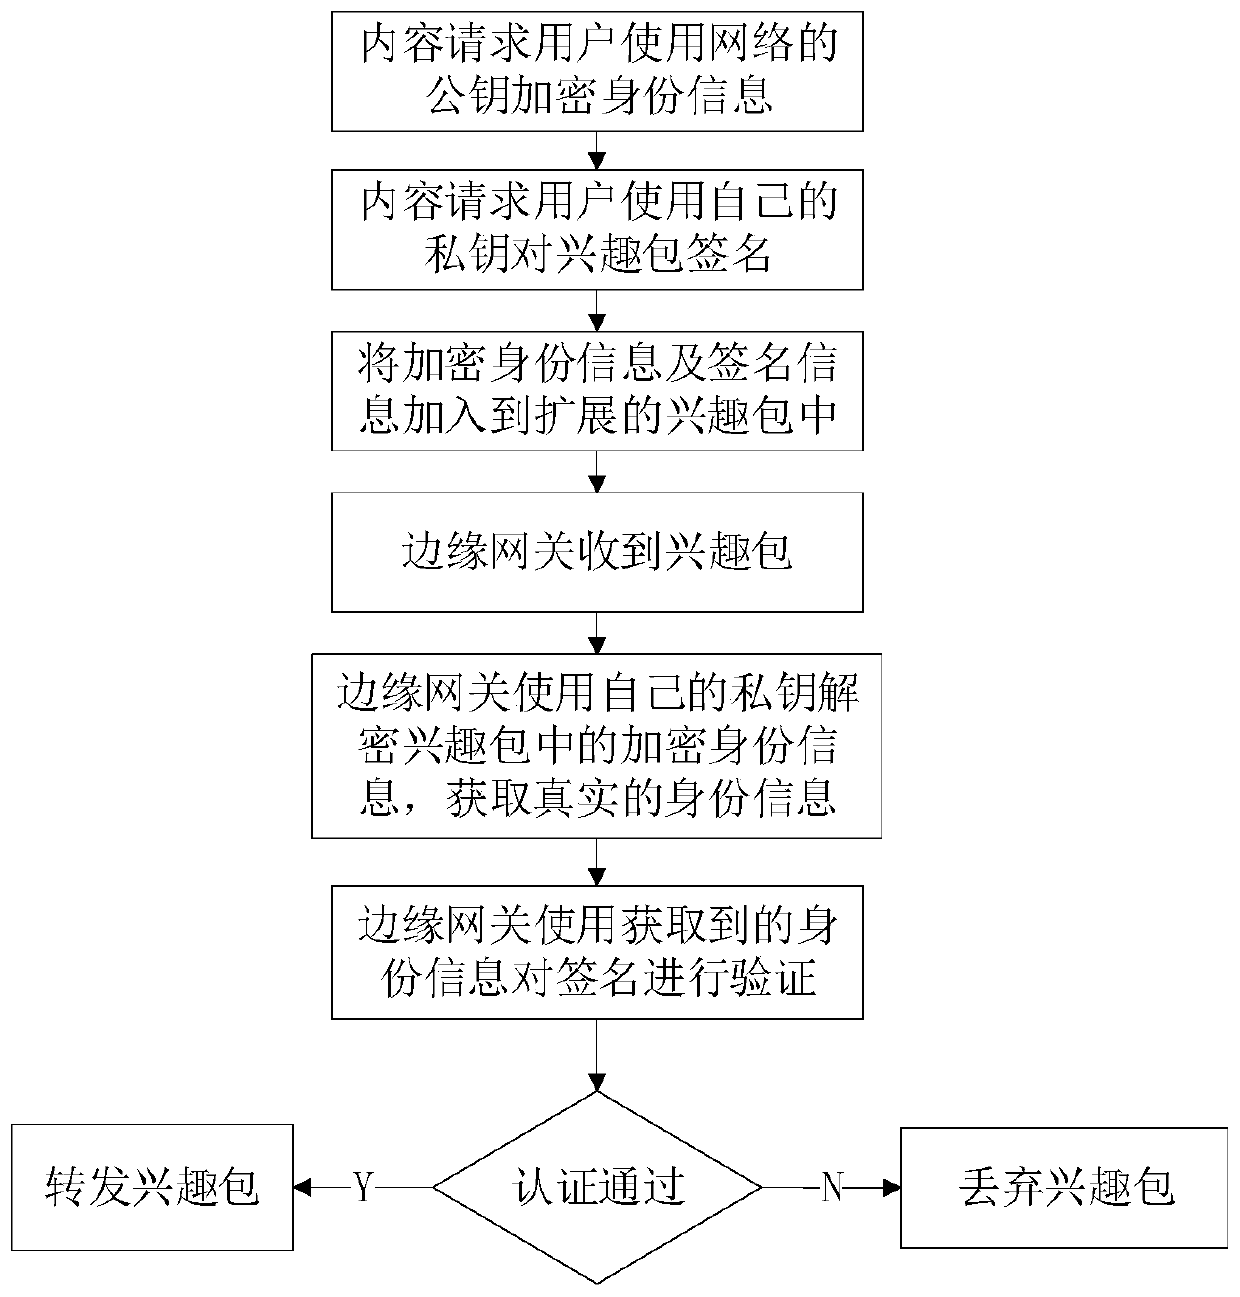 Identity authentication method for a content request user in an information center network